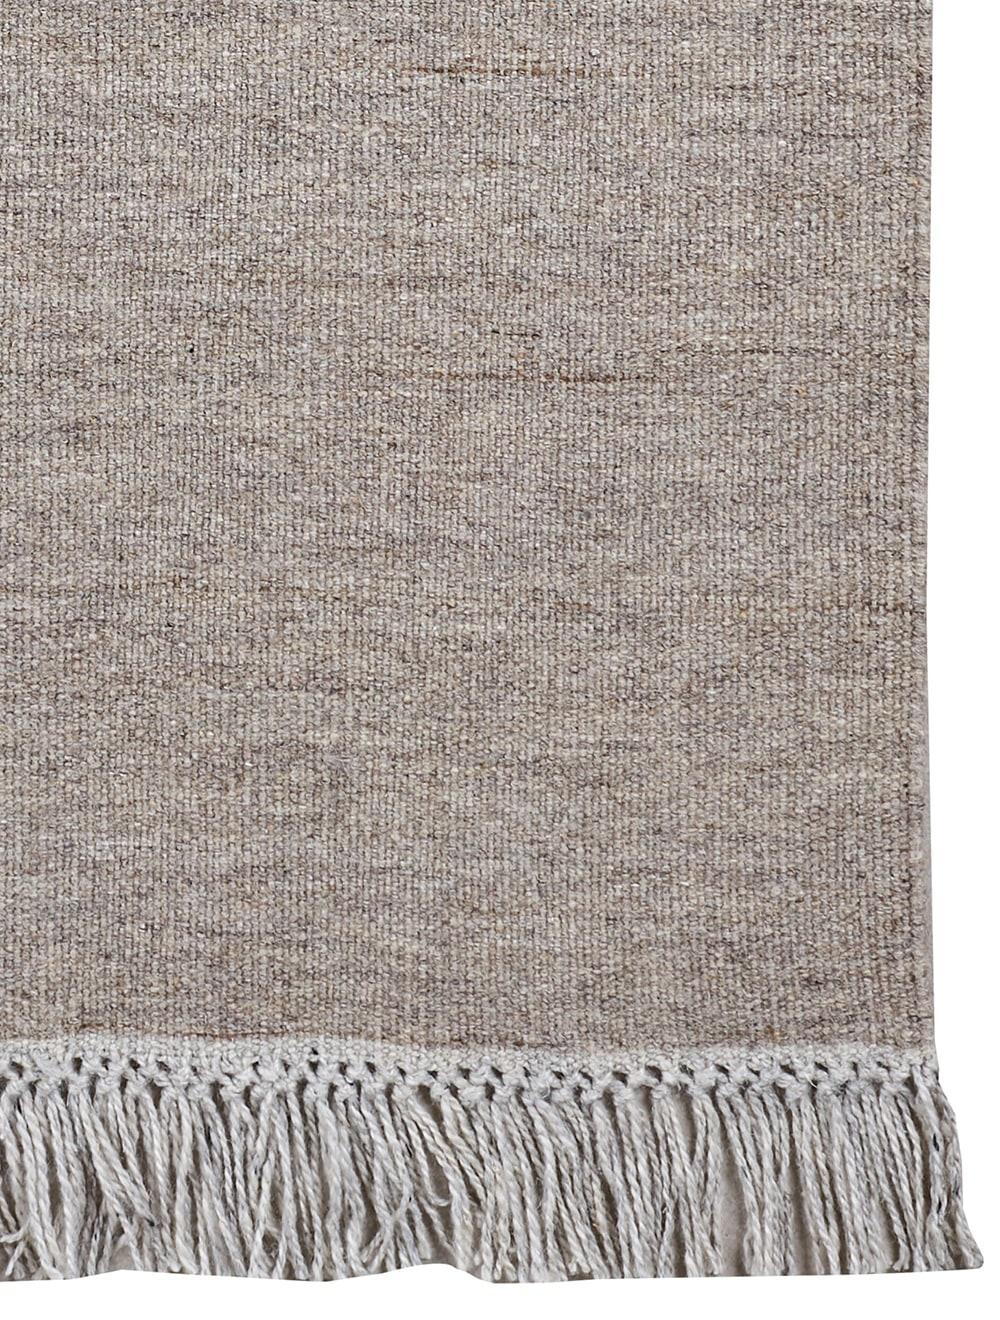 Muscat with Fringes Escape Kelim Carpet by Massimo Copenhagen
Designed by Space Copenhagen
Handwoven
Materials: 100% undyed natural wool.
Dimensions: W 300 x H 400 cm
Available colors: Chalk, Chalk with Fringes, Light Beige, Light Beige with